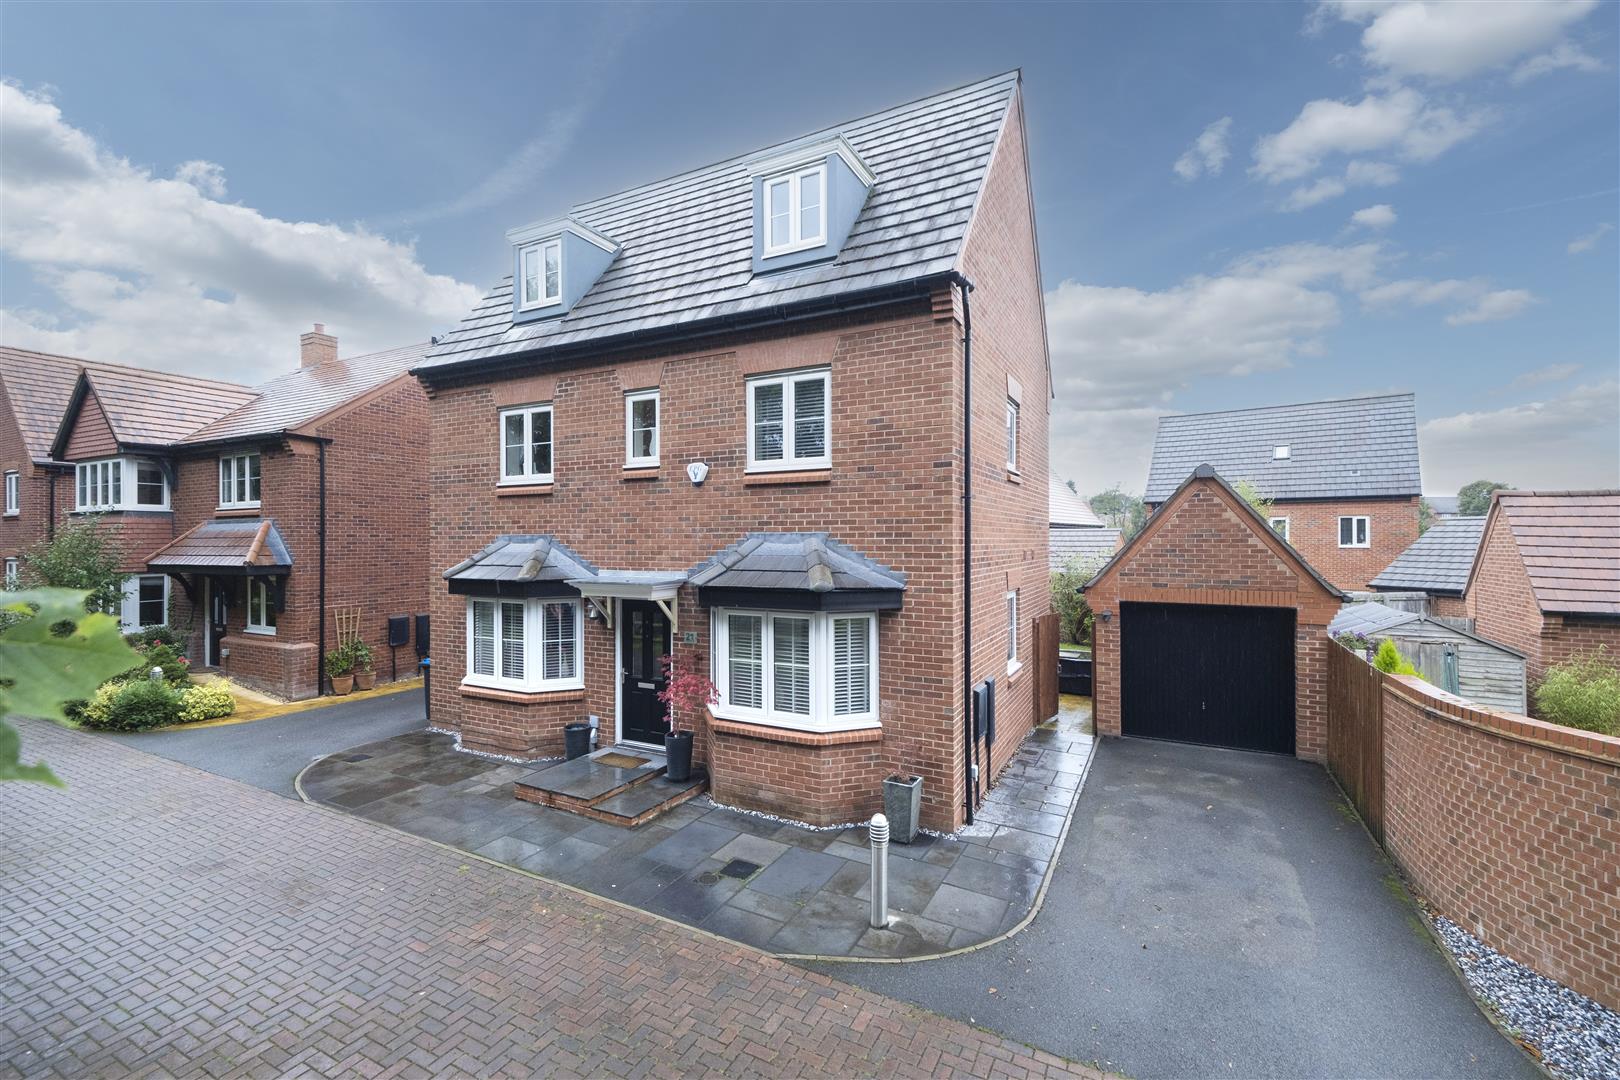 4 bedroom  Detached House for Sale in Northwich